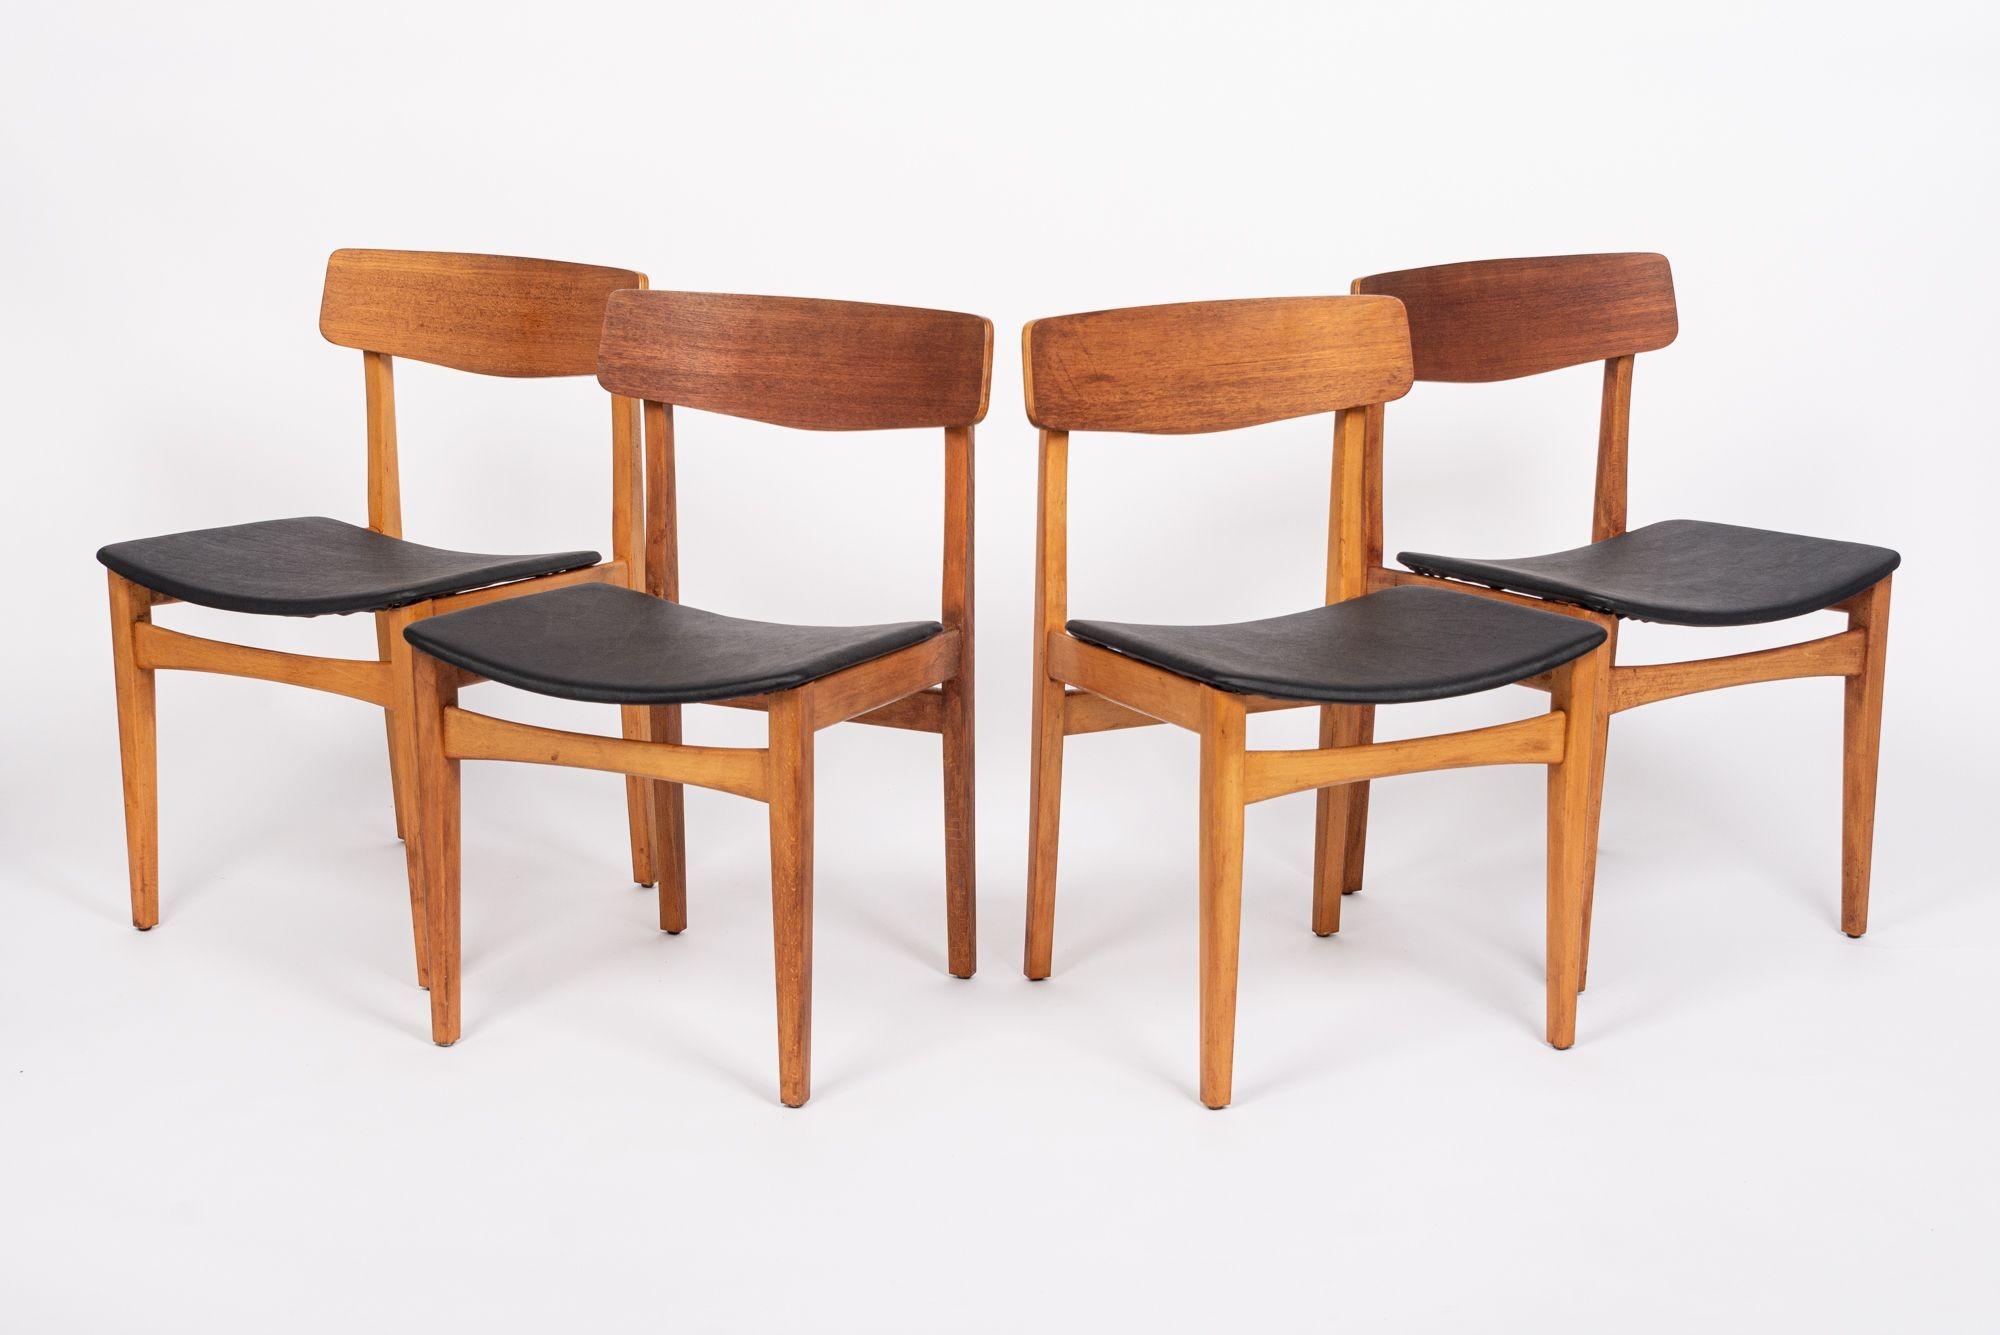 This set of four vintage mid century Danish modern teak wood dining chairs are circa 1960. These chairs have a classic Scandinavian design with clean lines and gentle curves. The chairs have a warm patina with sturdy solid teak wooden frames, bent